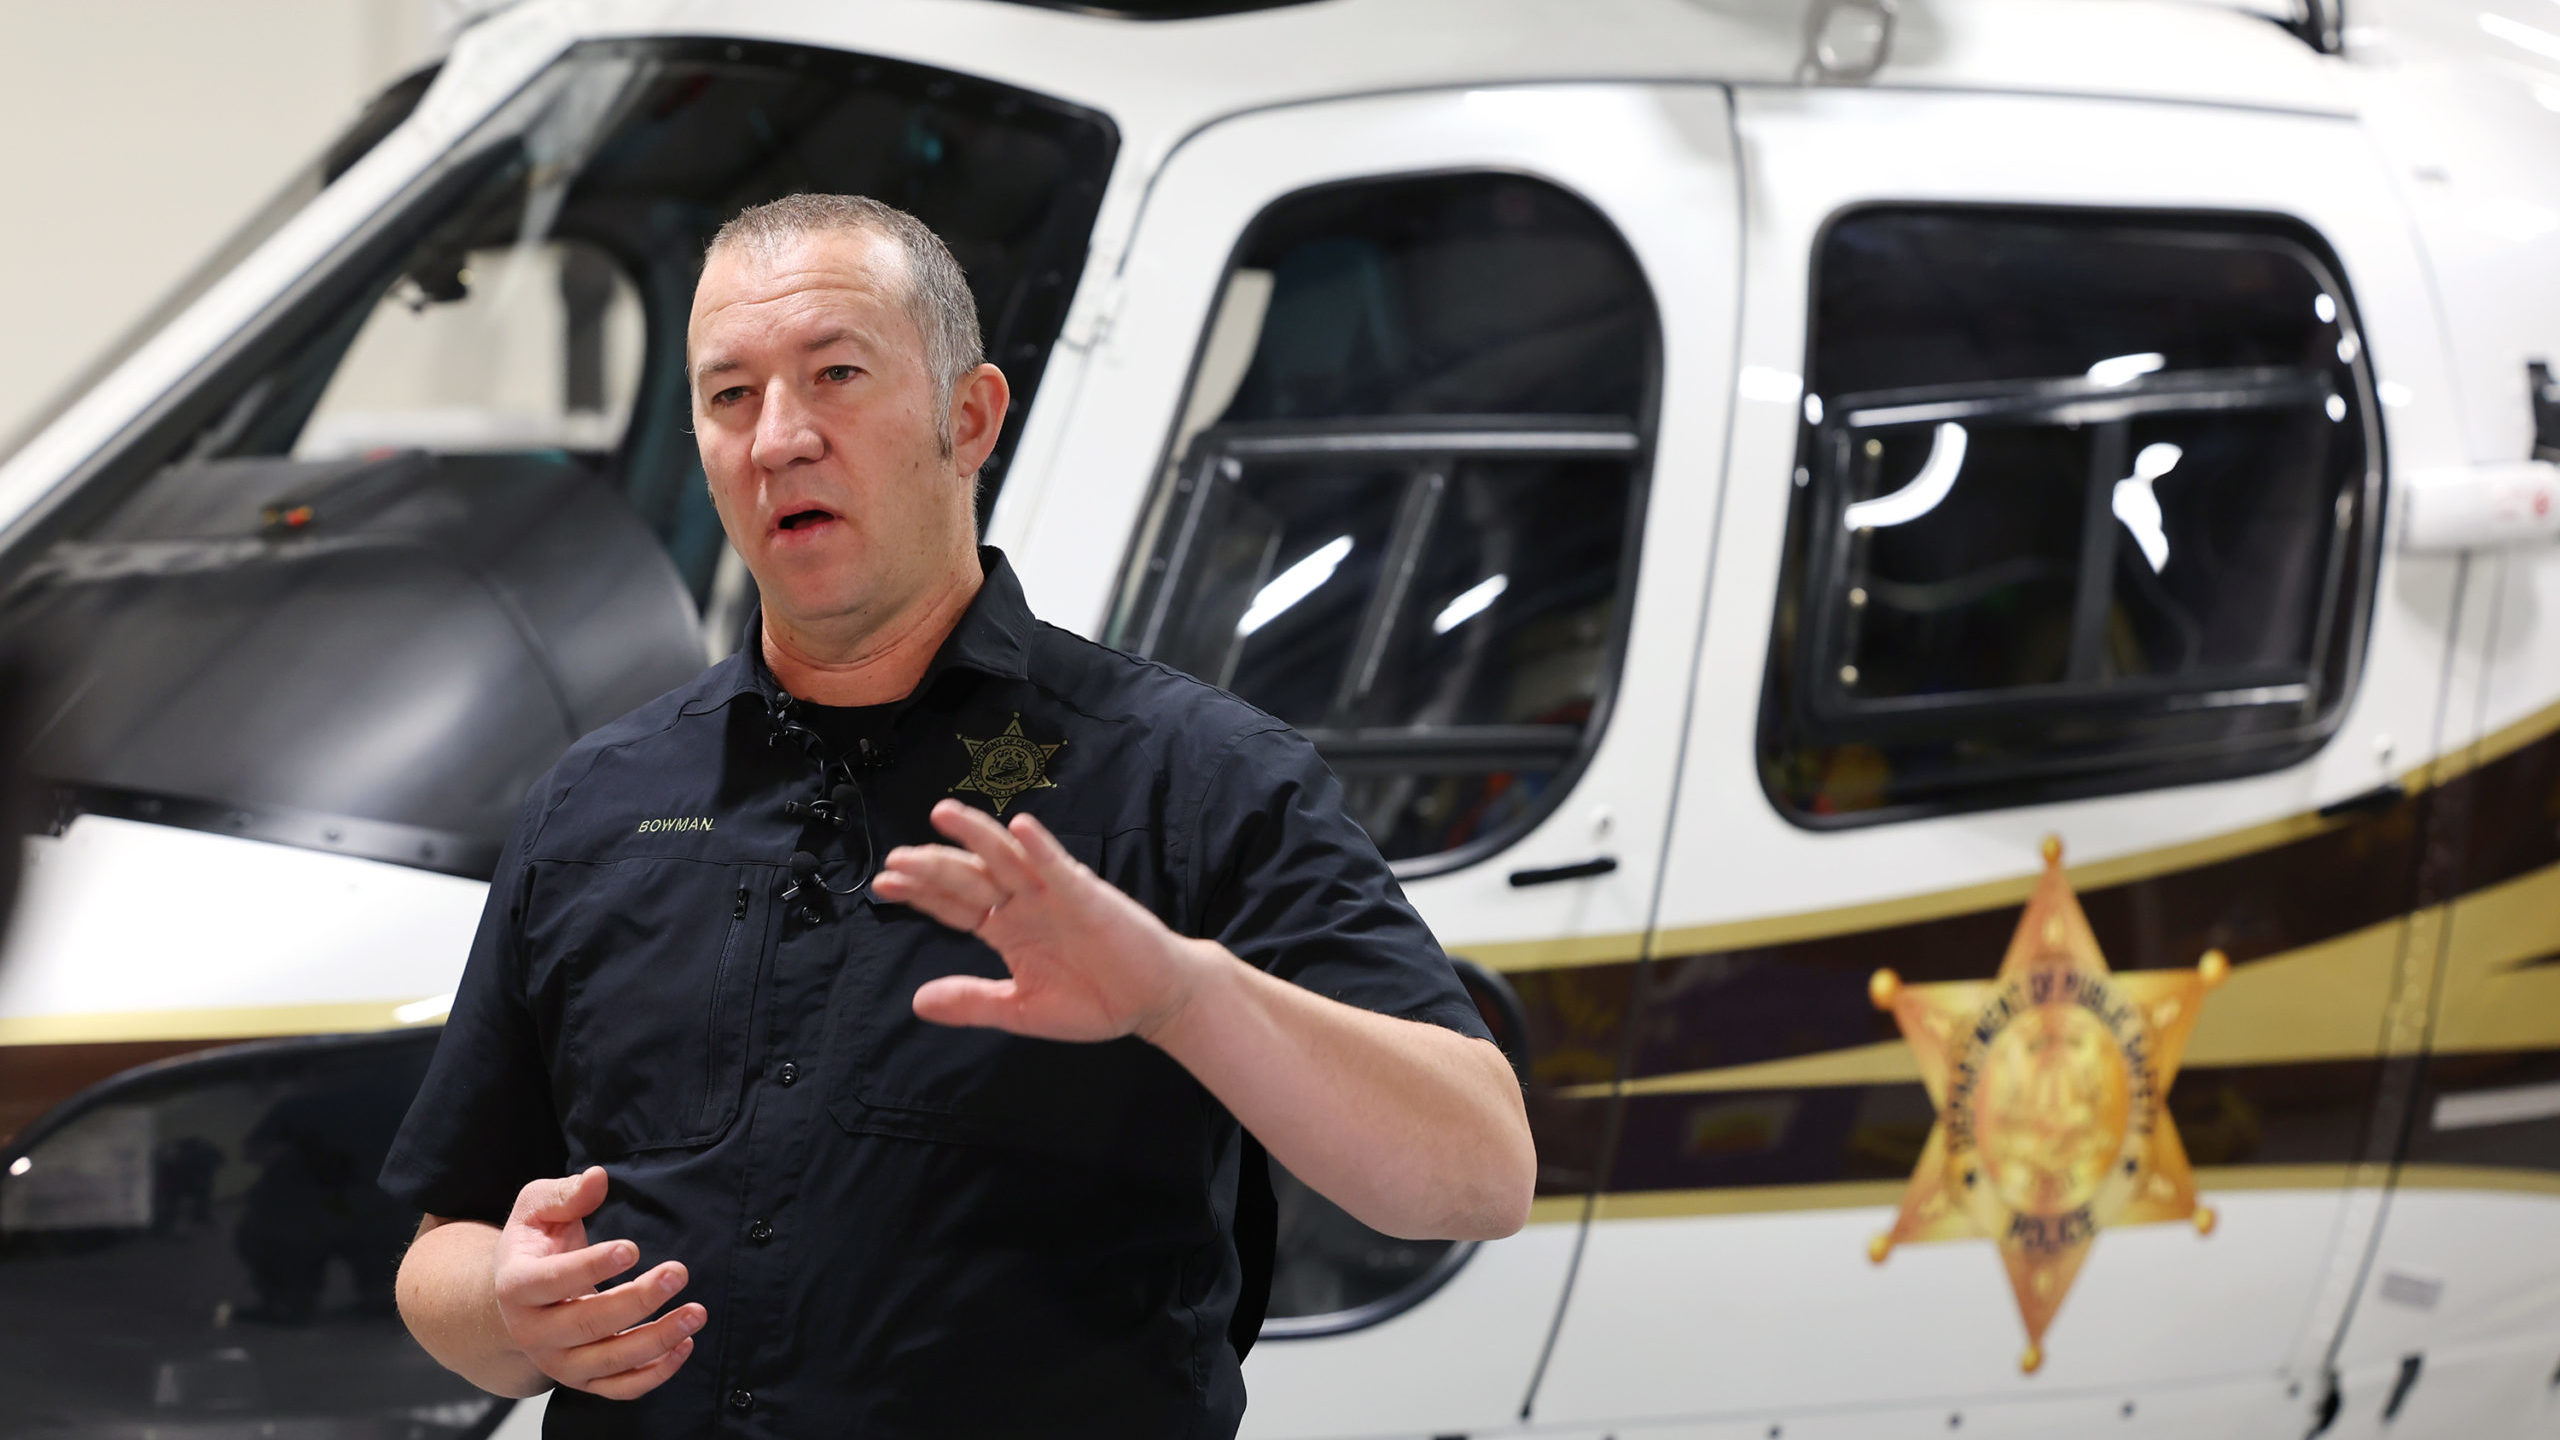 Utah Department of Public Safety pilot Luke Bowman talks with media about the mission to rescue peo...